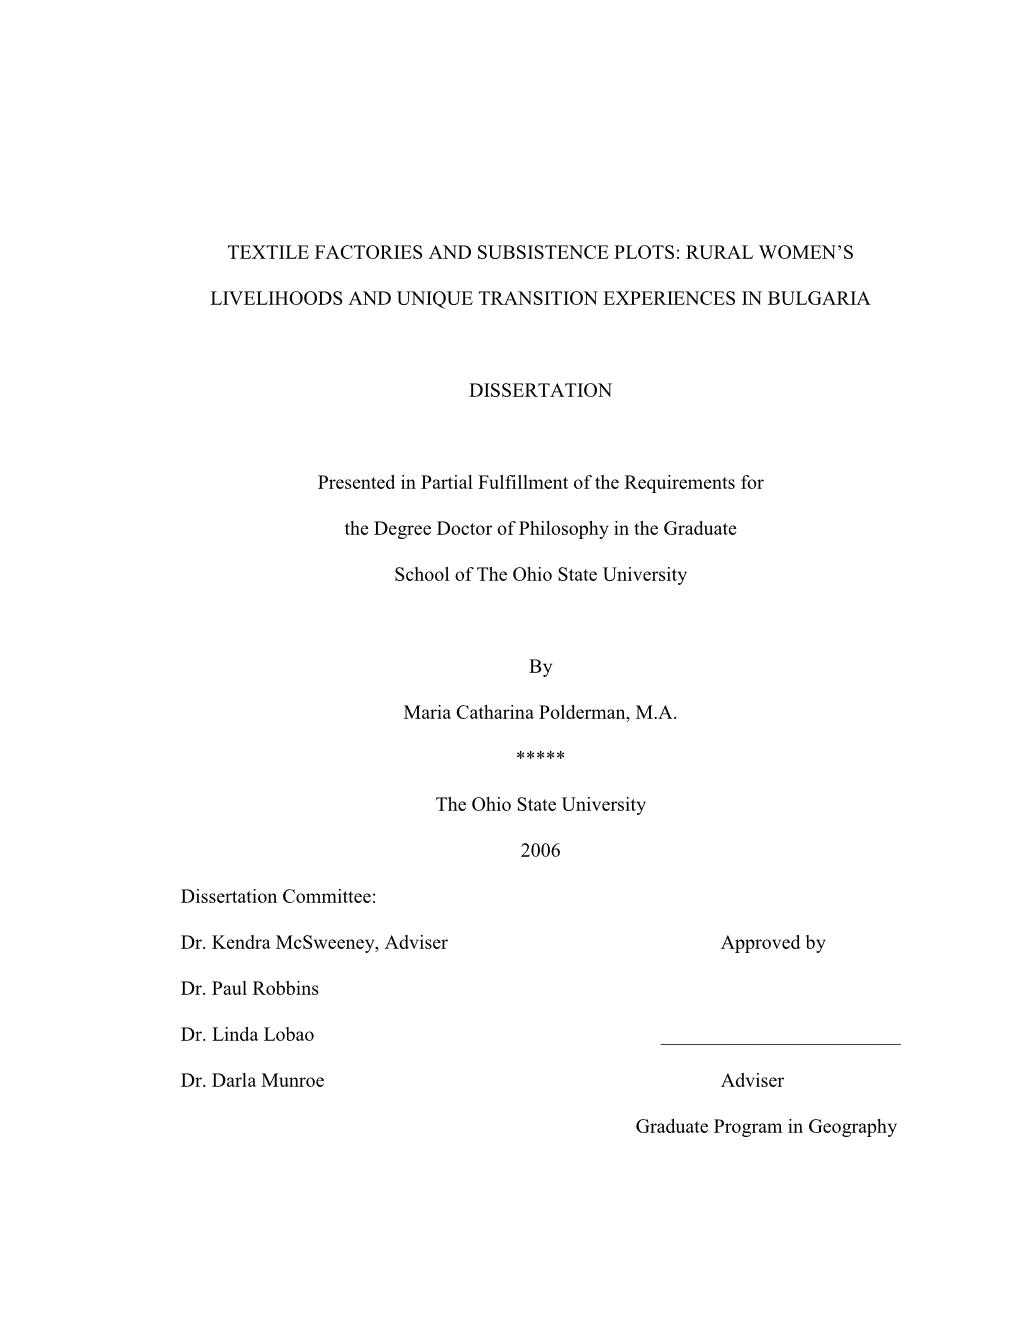 Rural Women's Livelihoods and Unique Transition Experiences in Bulgaria Dissertation